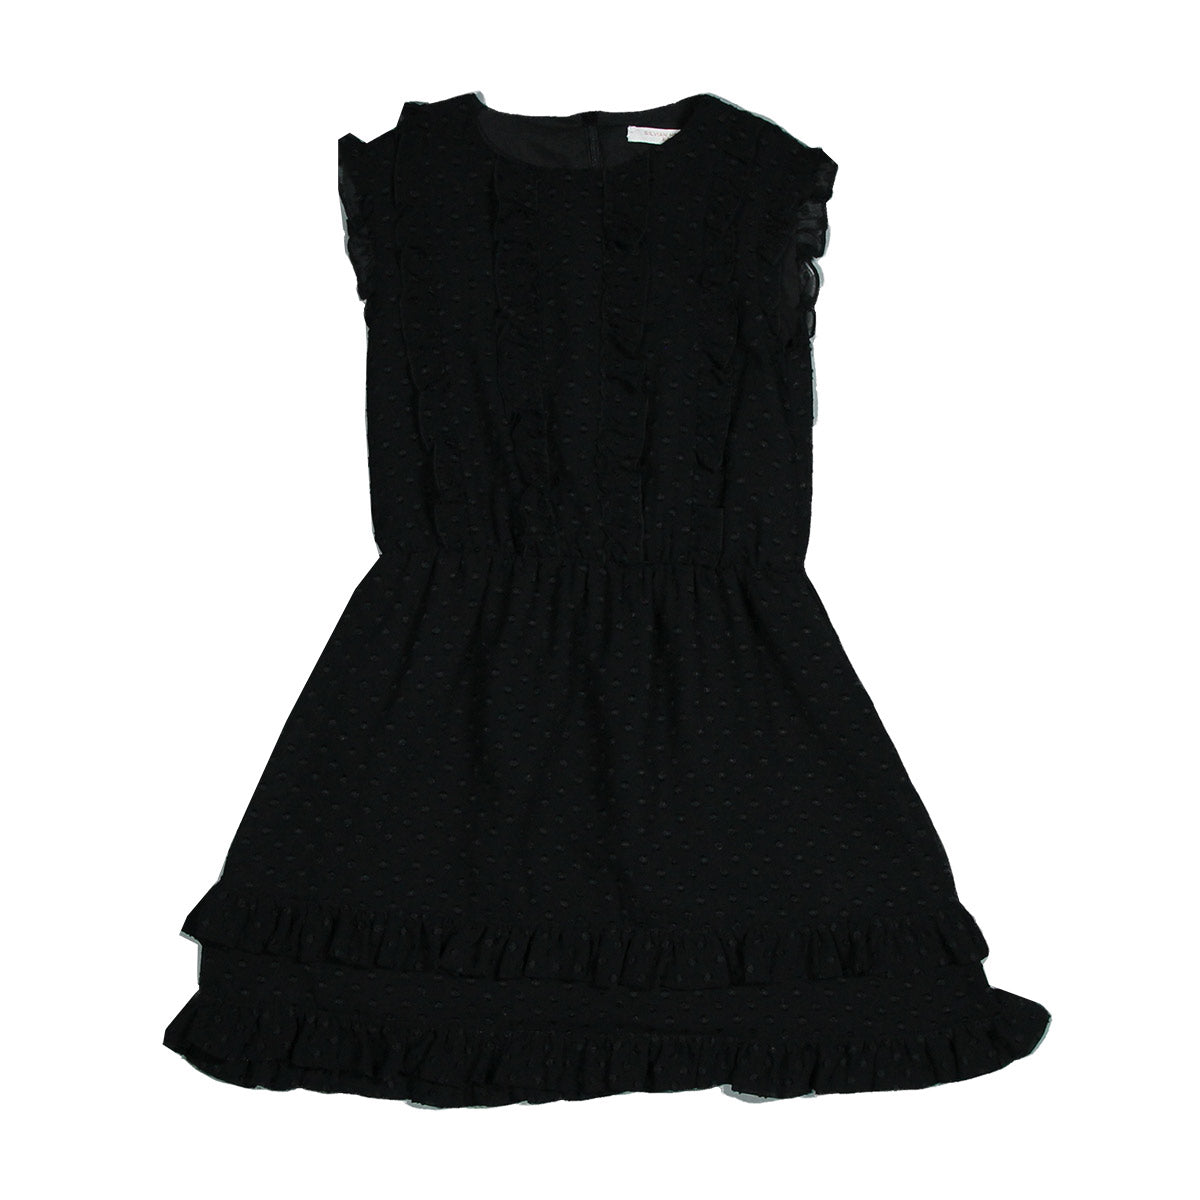 Little dress from the Silvian Heach Kids clothing line, with sleeves around the sleeves and zip f...